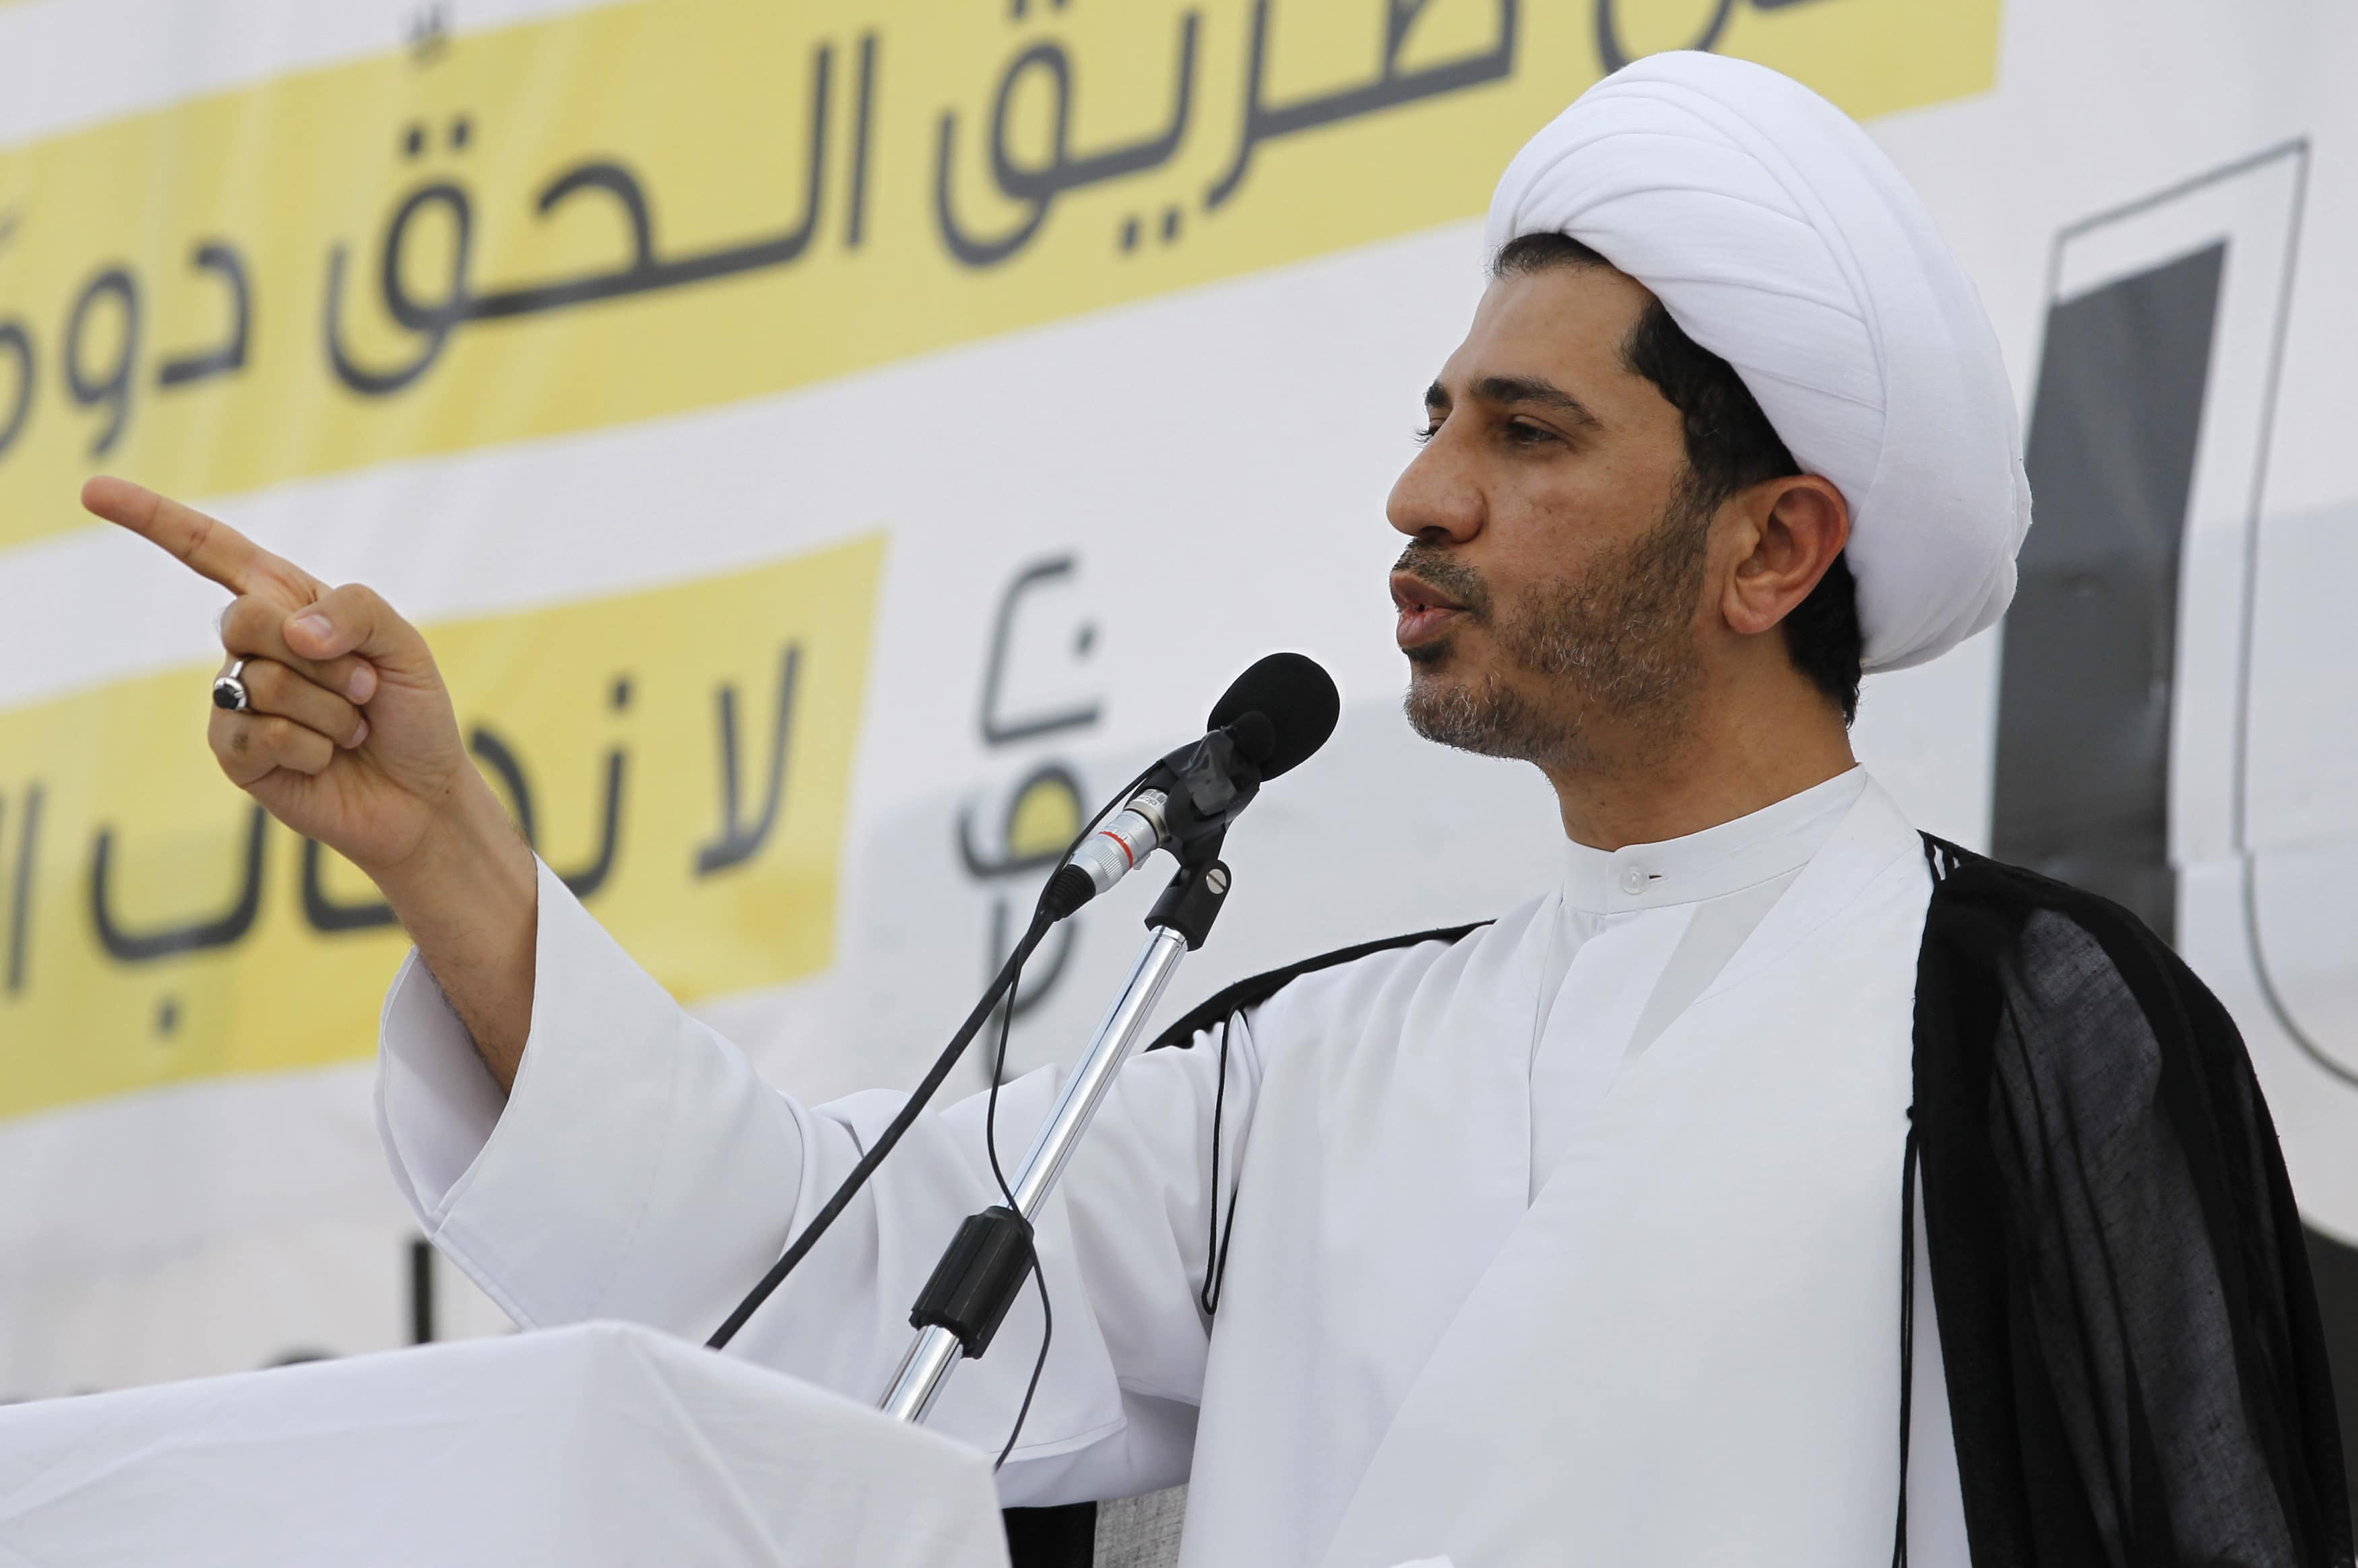 General Secretary of Bahrain's main opposition party Al Wefaq Sheikh Ali Salman speaks during an anti-government sit-in on 3 May 2013, REUTERS/Hamad I Mohammed